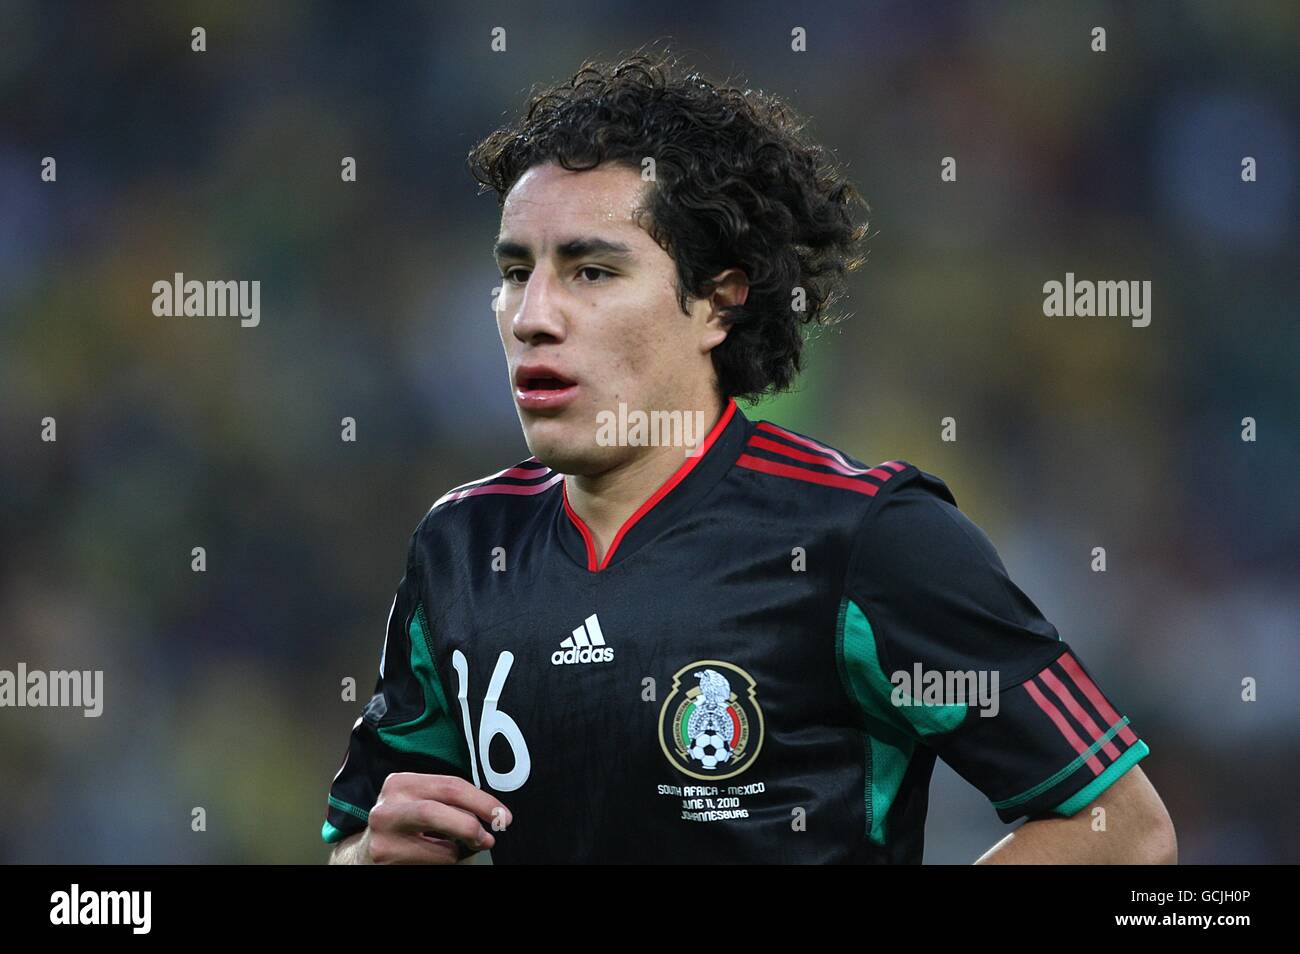 Soccer - 2010 FIFA World Cup South Africa - Group A - South Africa v Mexico - Soccer City Stadium. Andres Guardado, Mexico Stock Photo